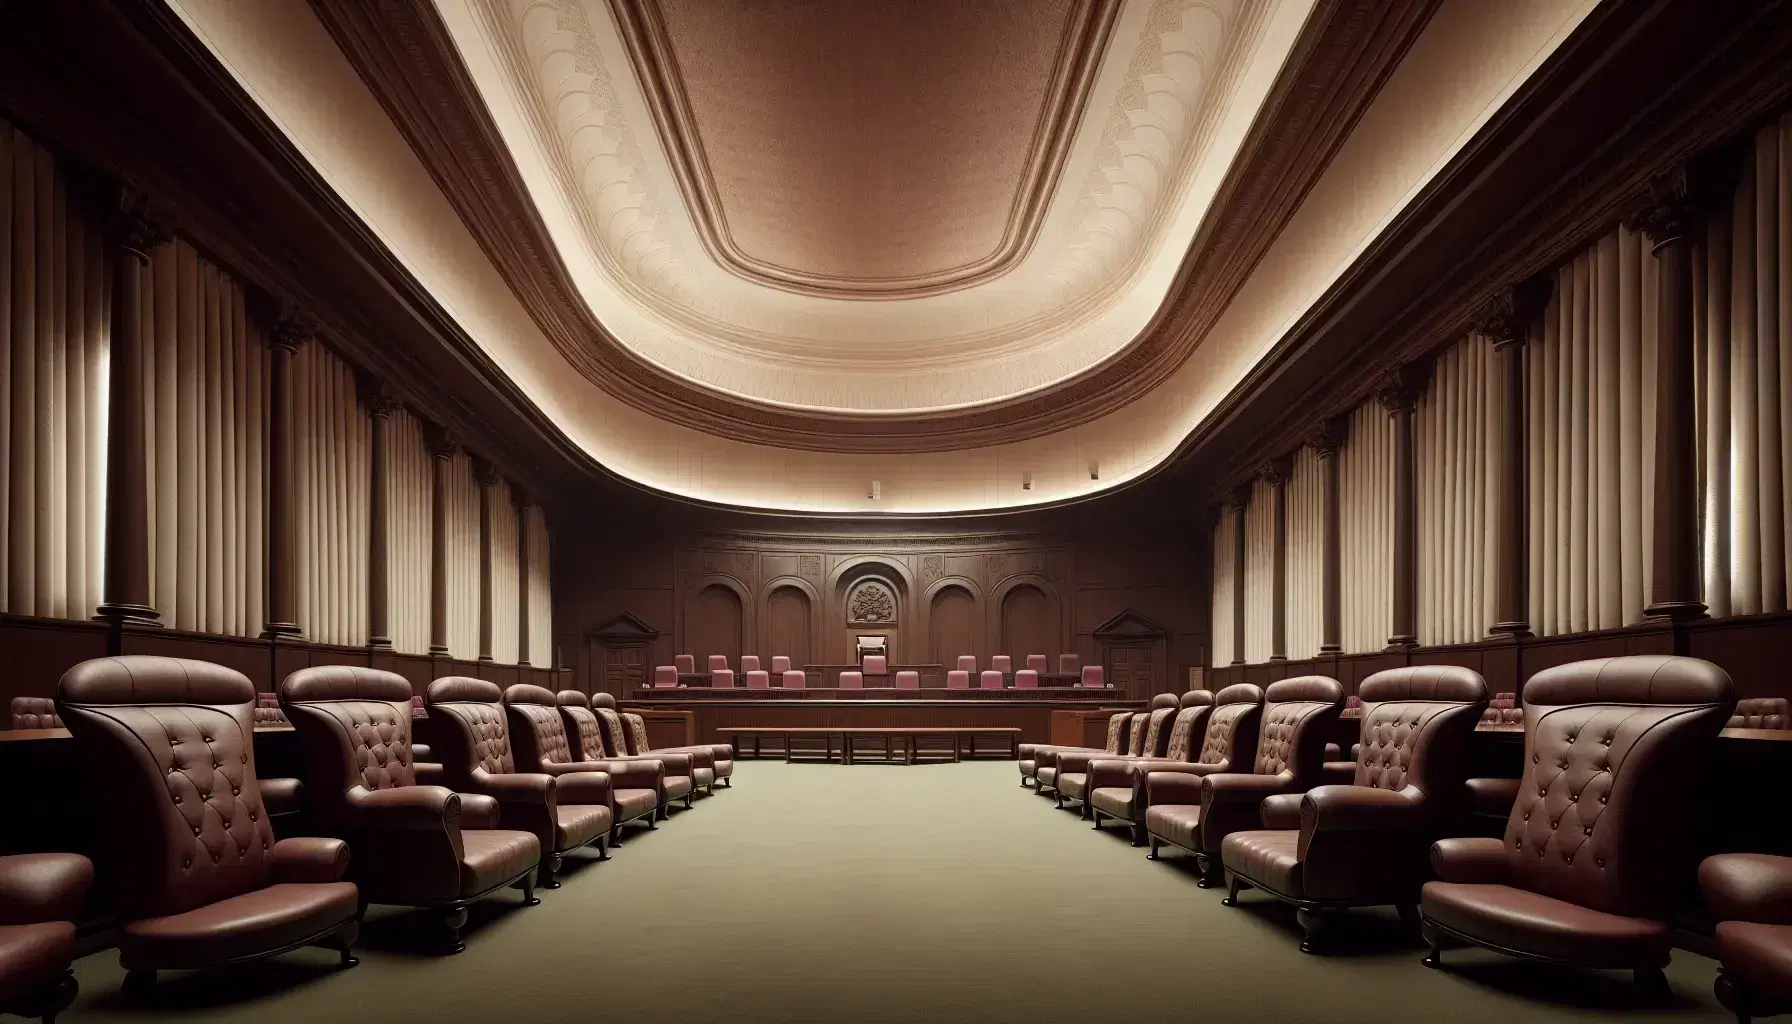 Central hall of the Supreme Court of India with curved dark wooden bench, chairs with burgundy upholstery and dark green carpet.